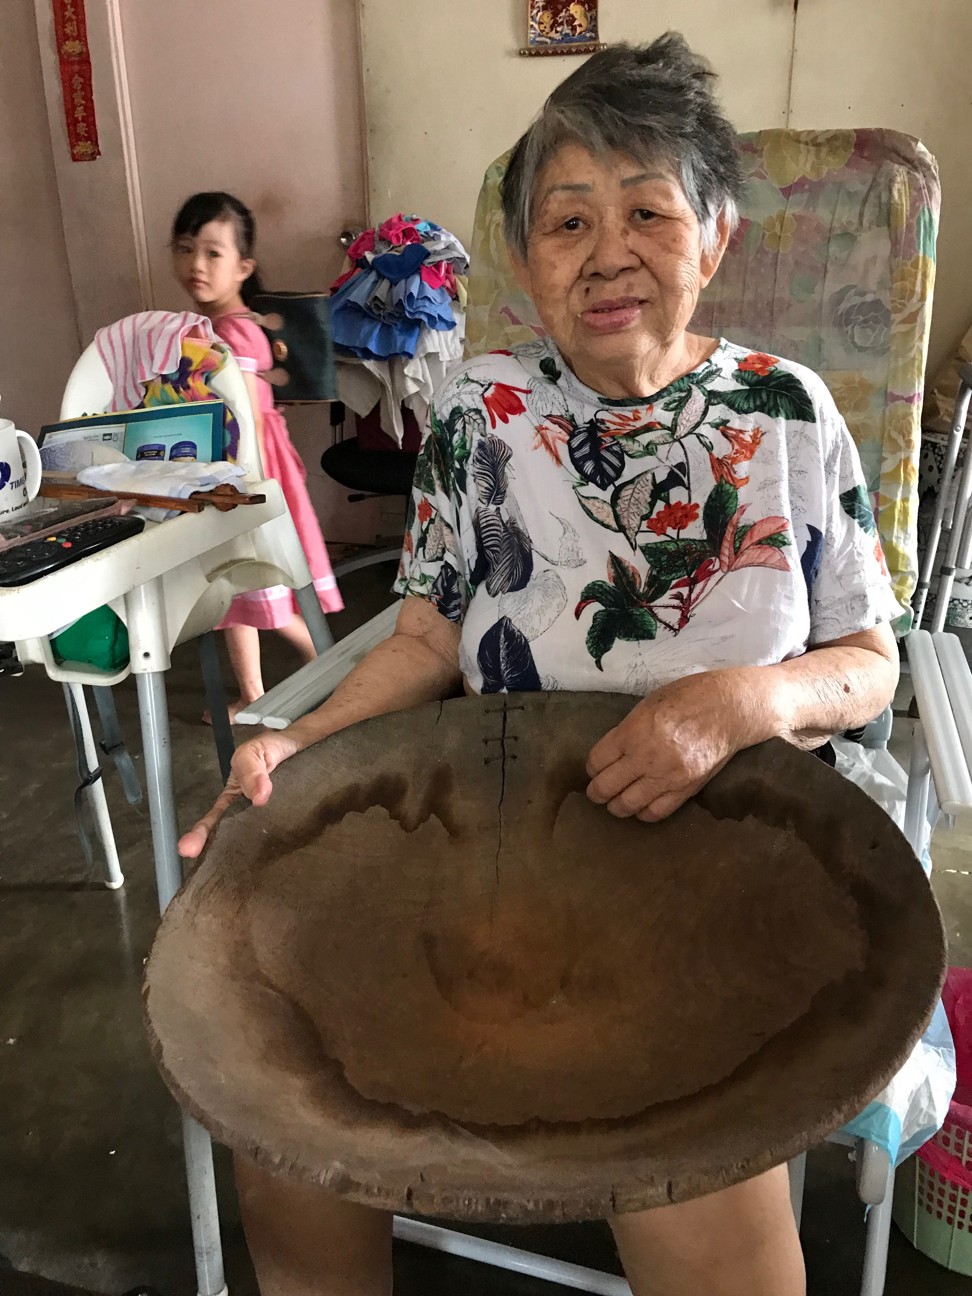 A villager showing an old item from her home. A team seeking to revive Kampung Cempaka has proposed setting up a community museum. Photo: Project Community Kampung Cempaka.